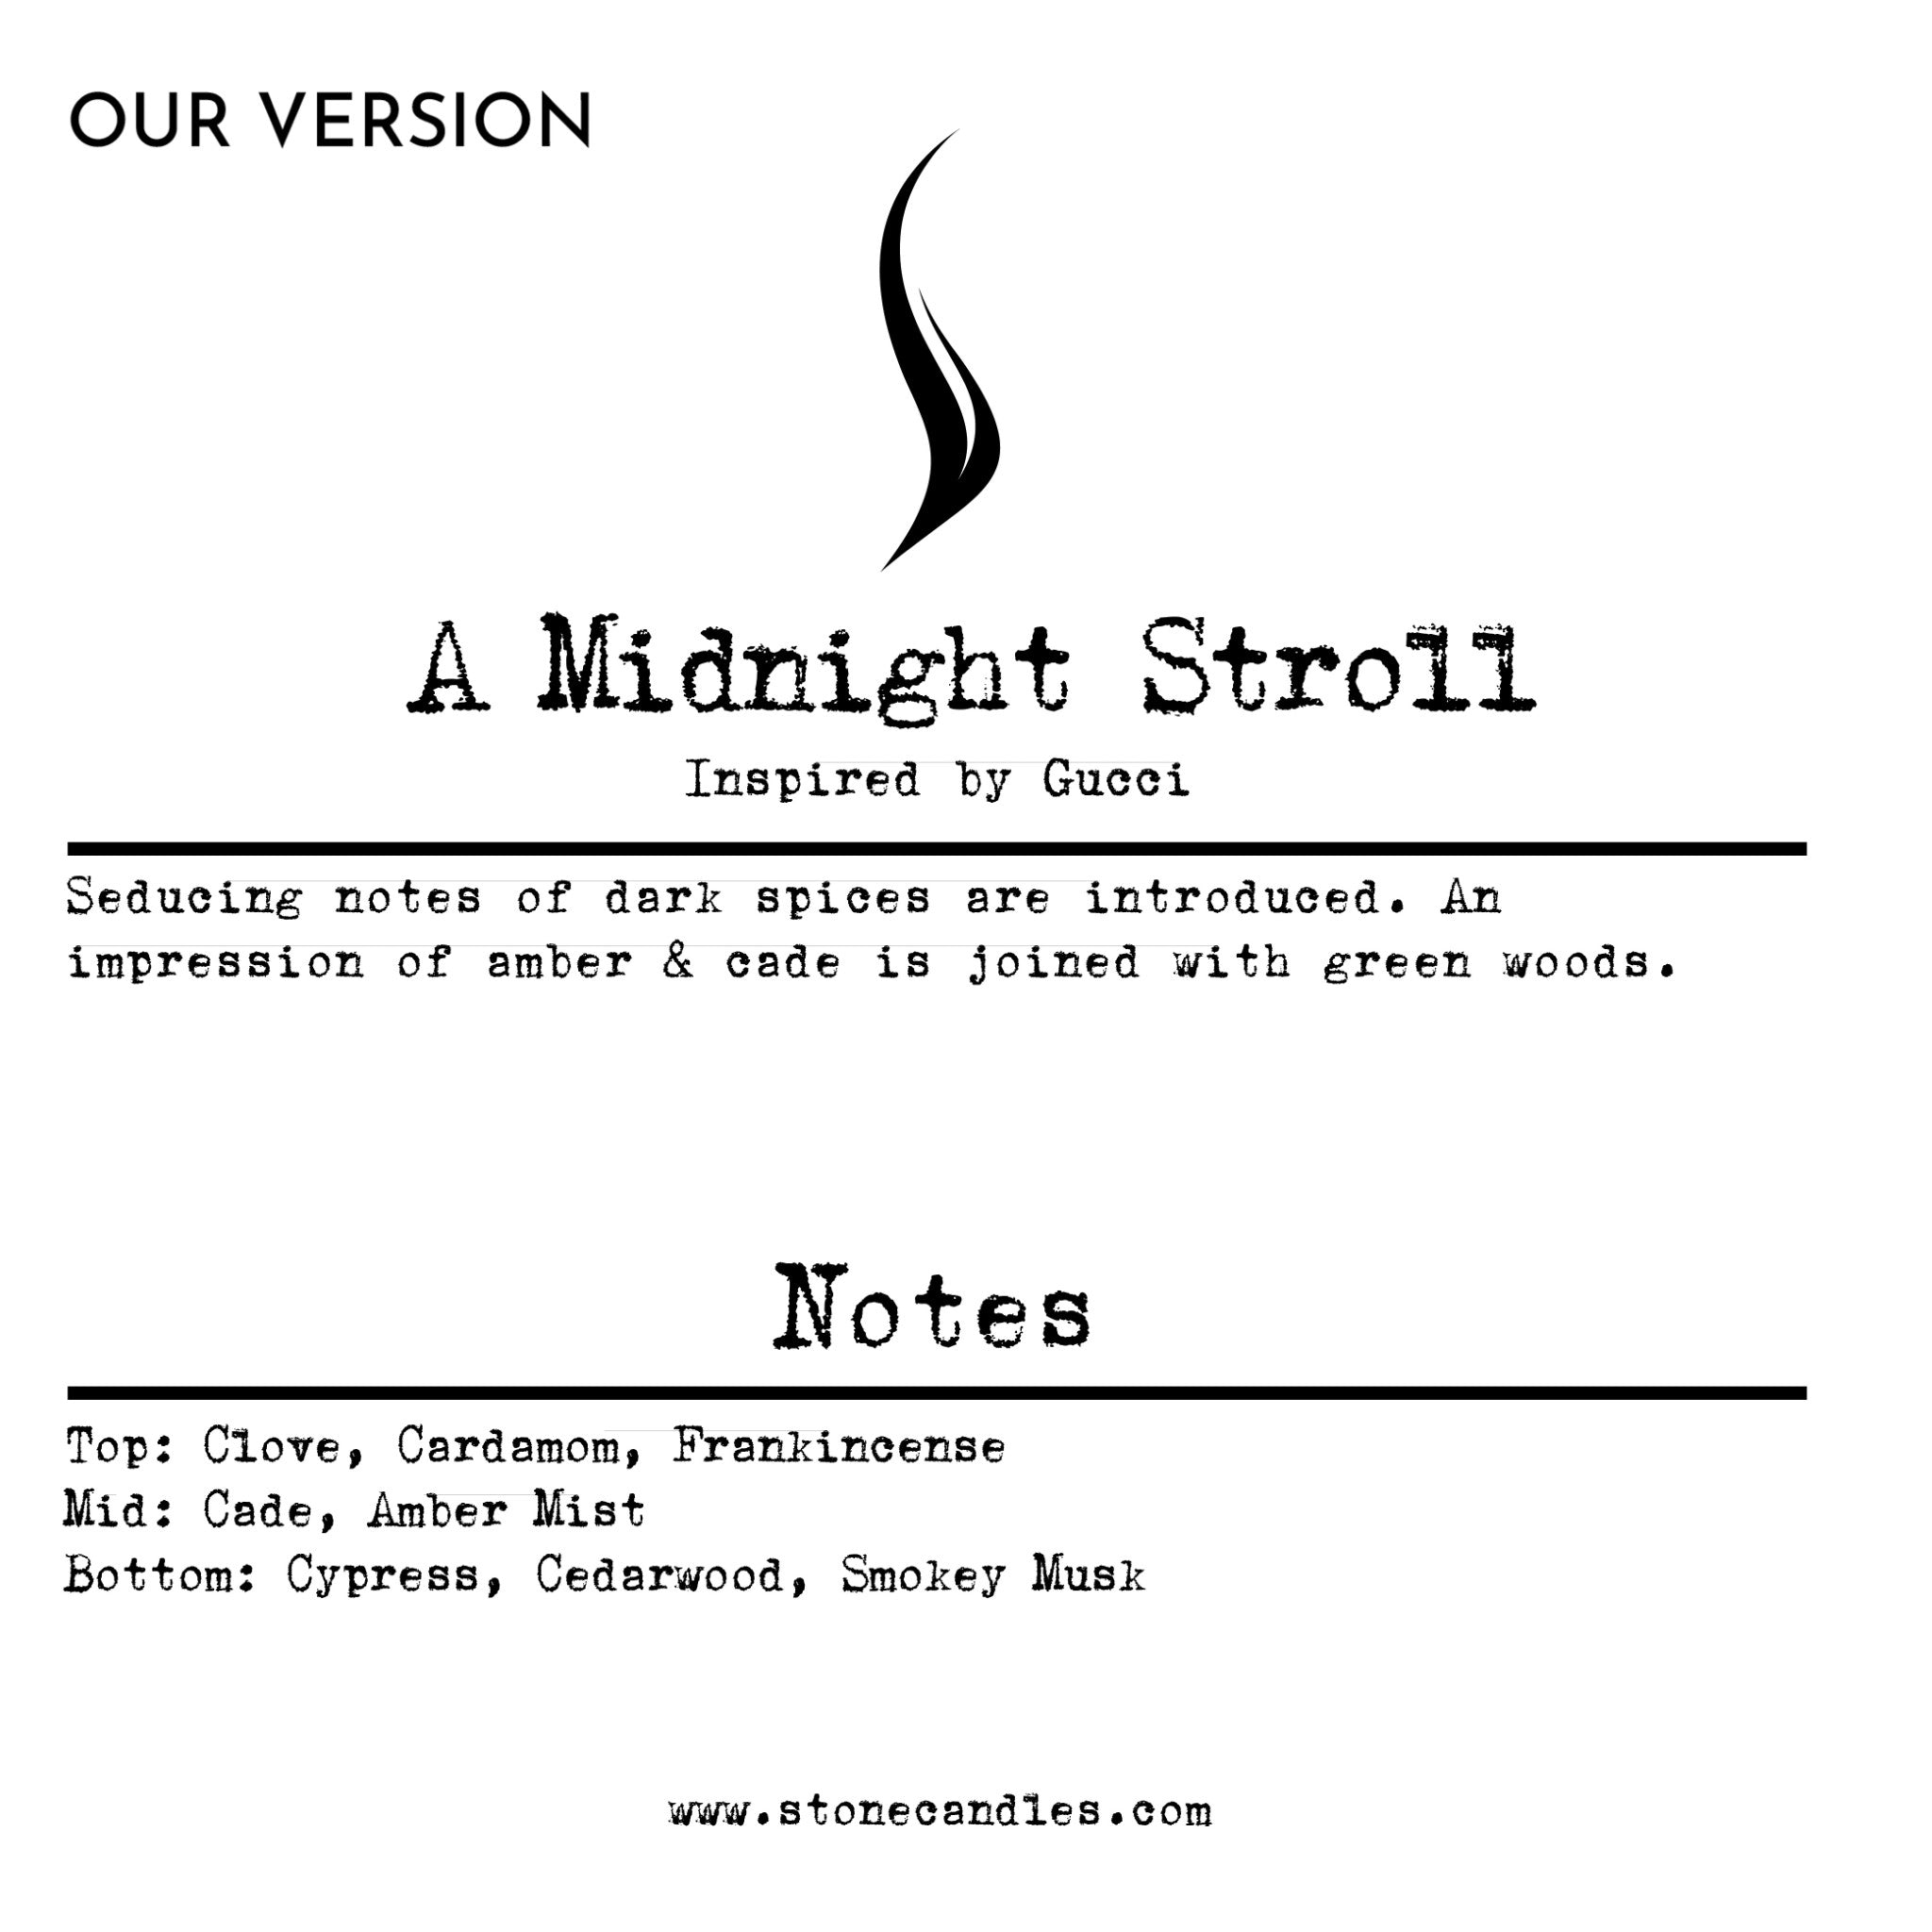 A Midnight Stroll (our version) Sample Scent Strip